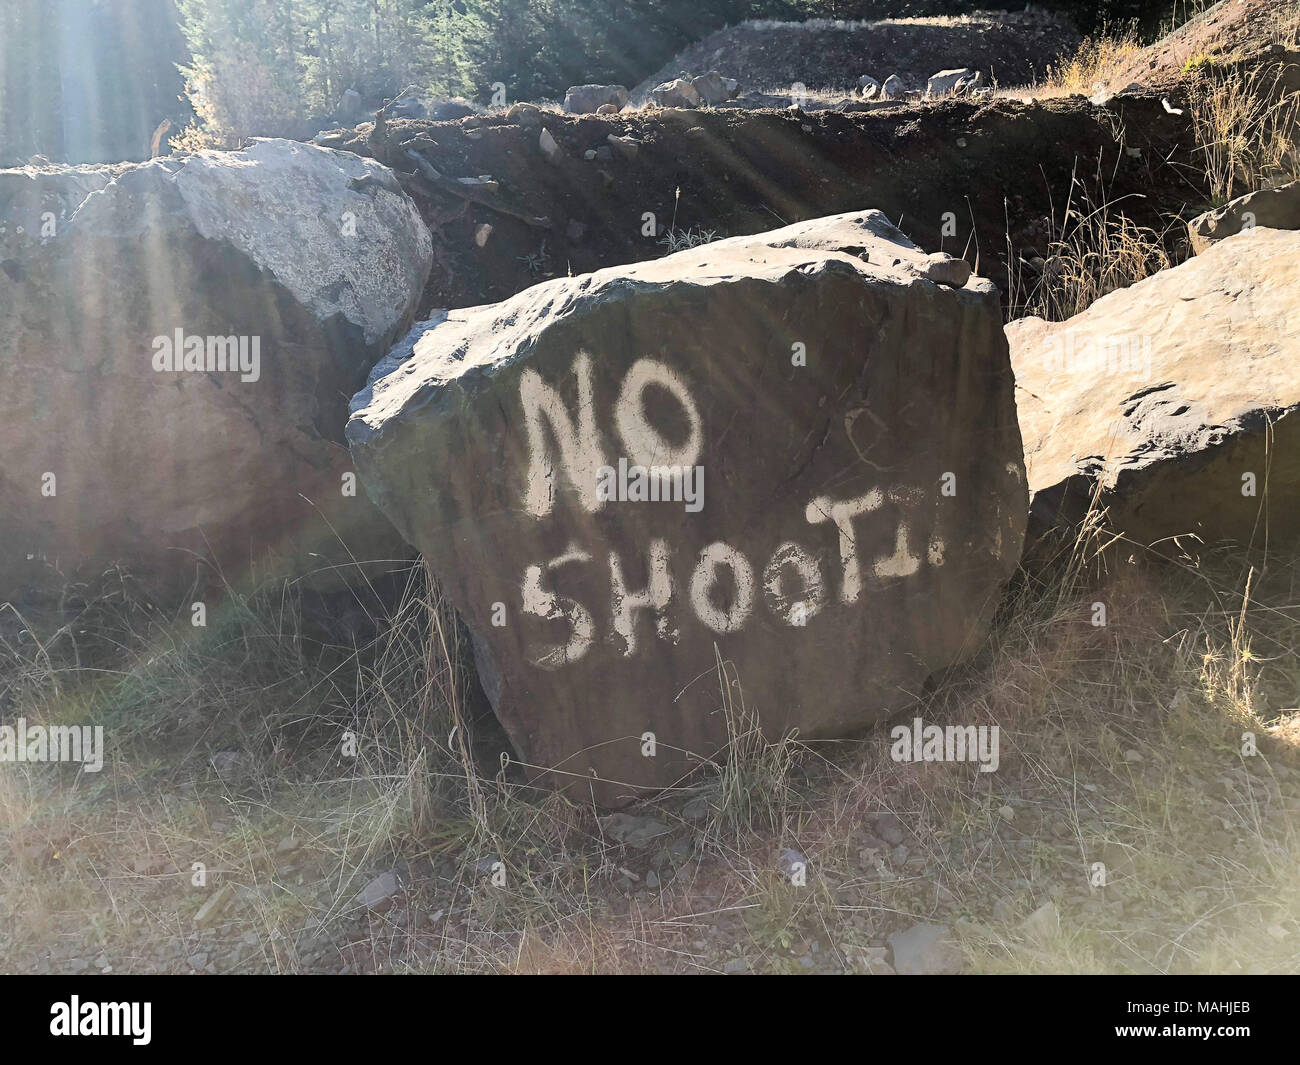 No Shooting Painted on Rock Stock Photo